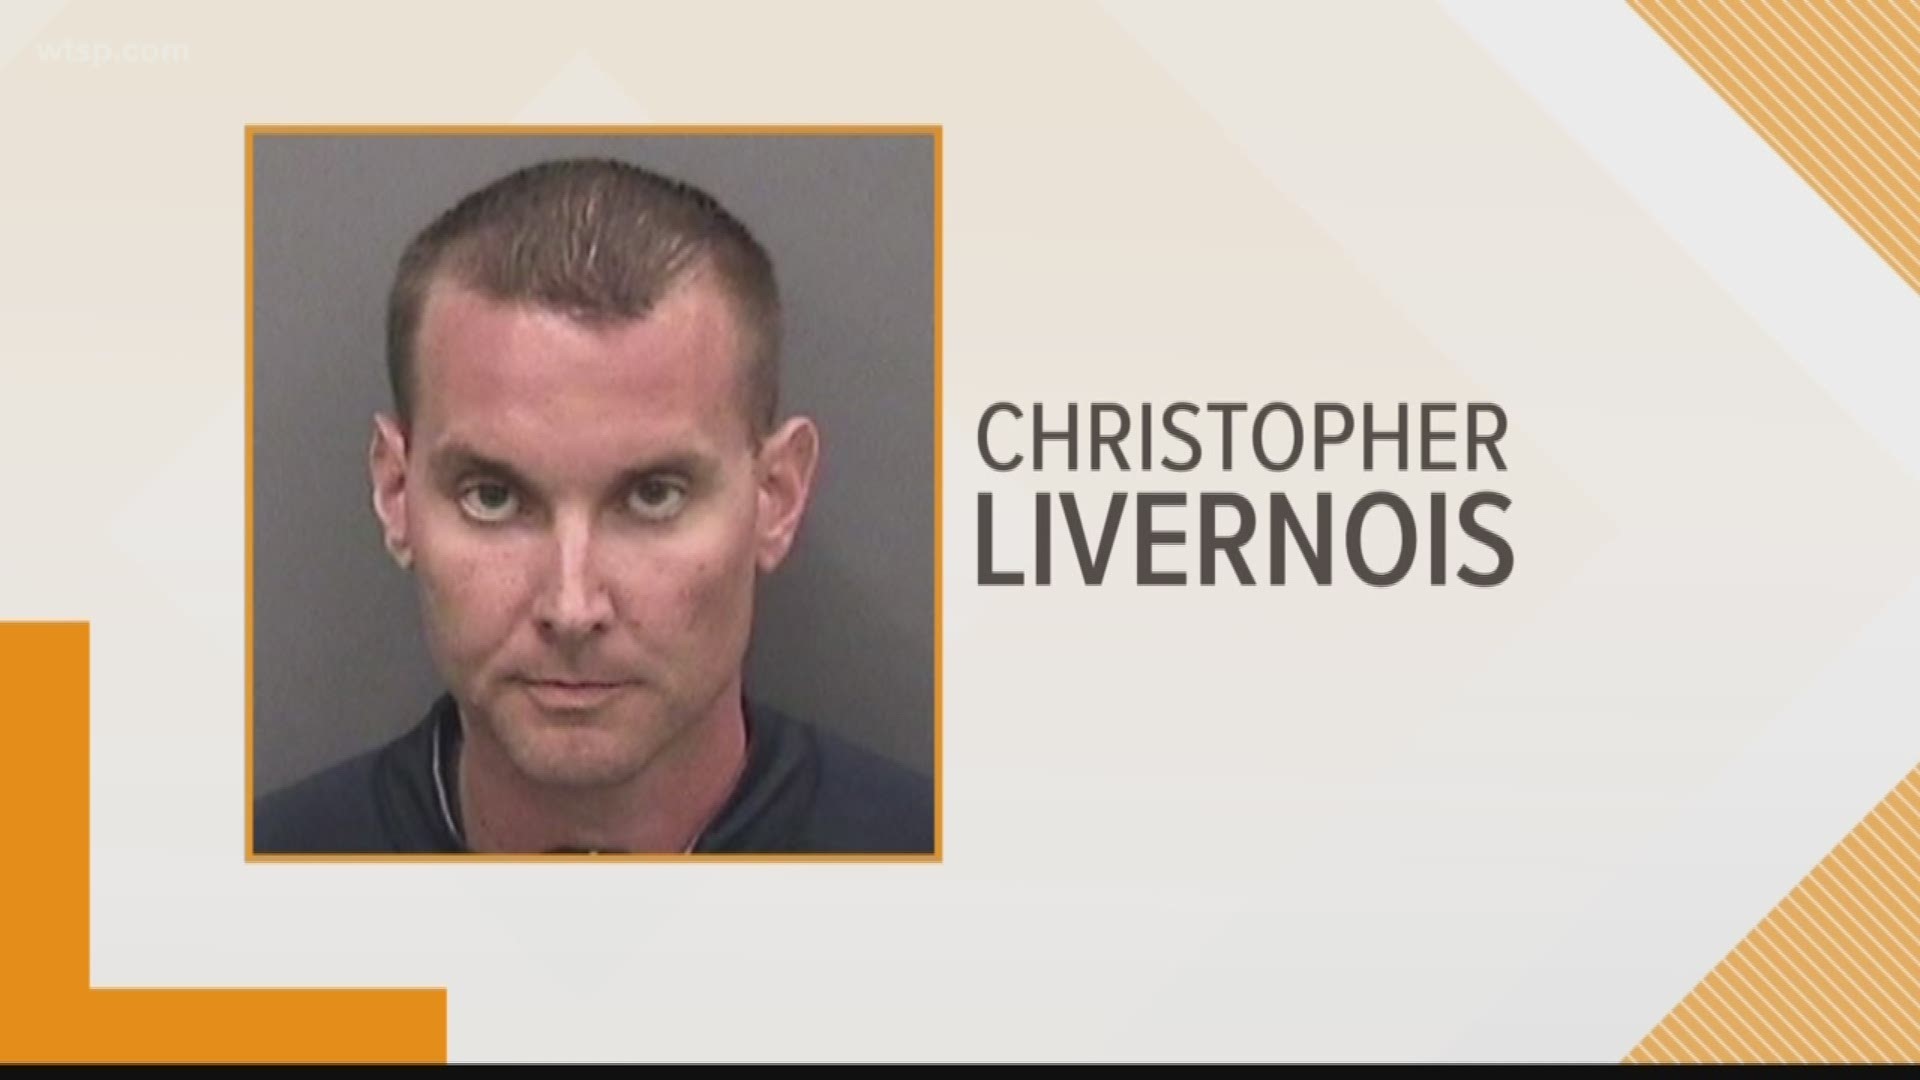 Christopher Livernois works as a property control specialist at the Hillsborough County Sheriff's Office warehouse supply section.